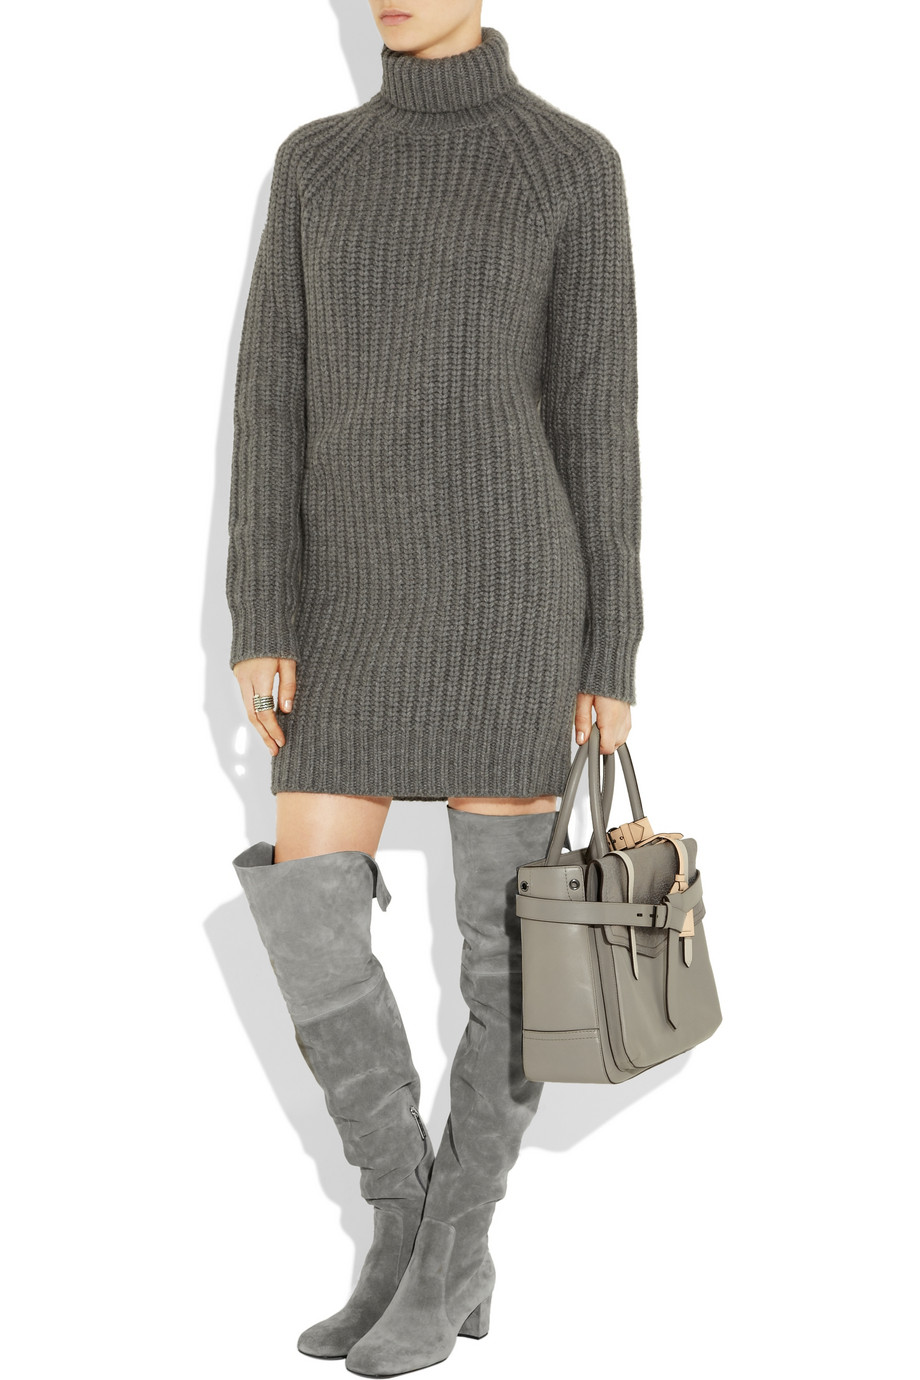 michael kors suede over the knee boots